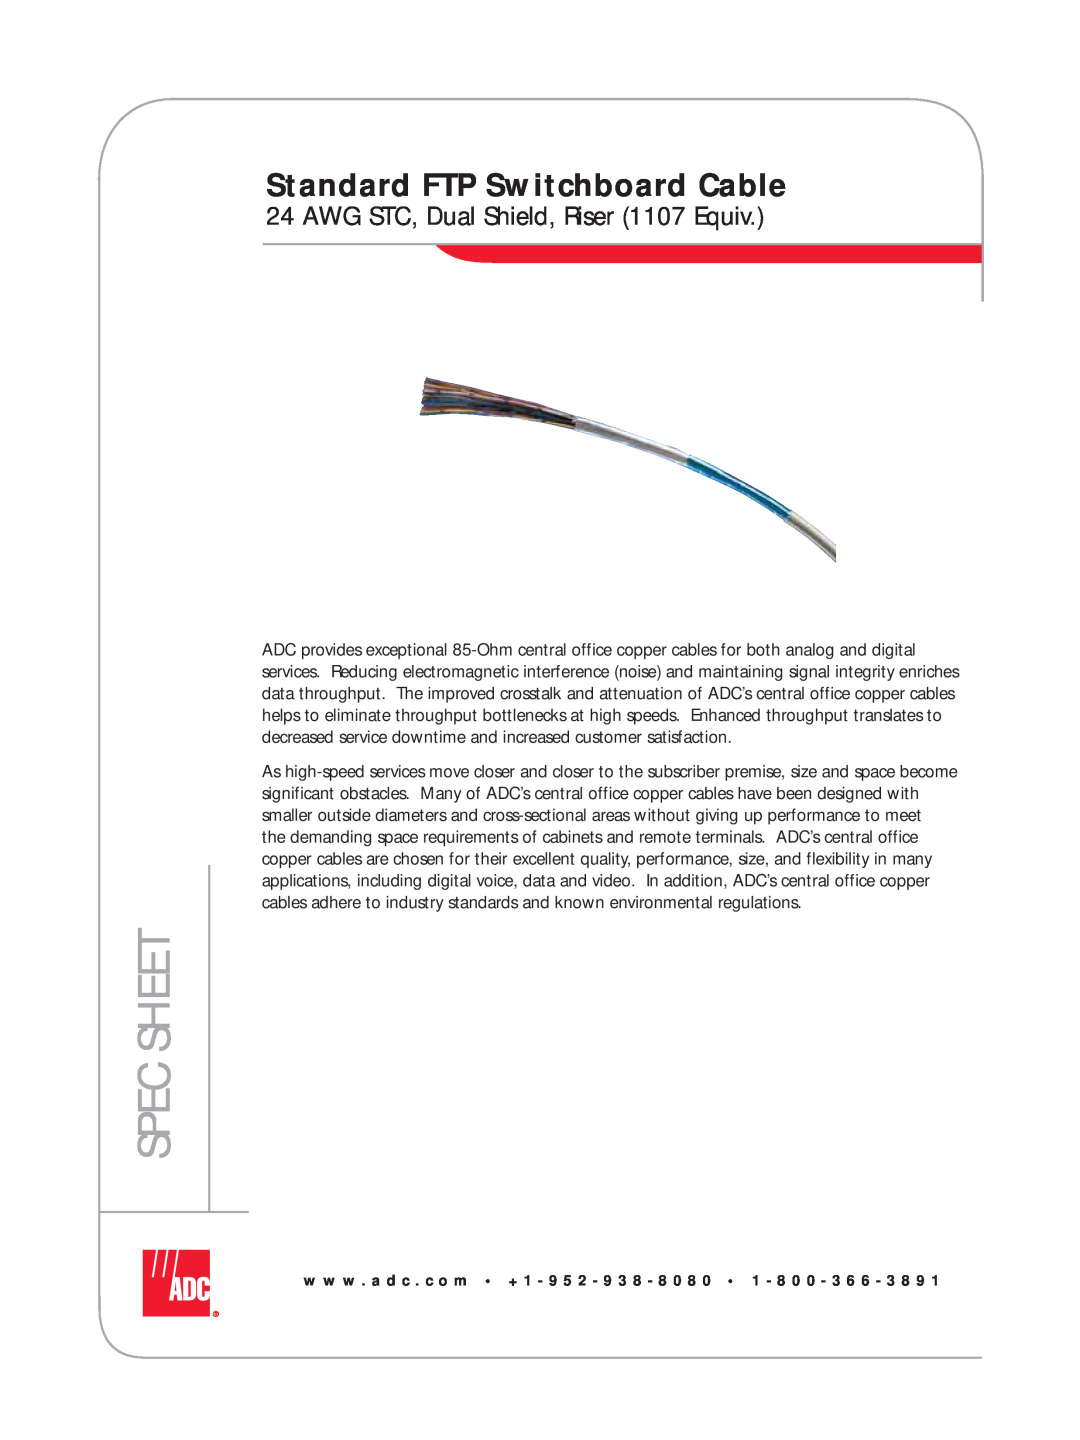 ADC Standard FTP Switchboard Cable manual AWG STC, Dual Shield, Riser 1107 Equiv, Spec Sheet 